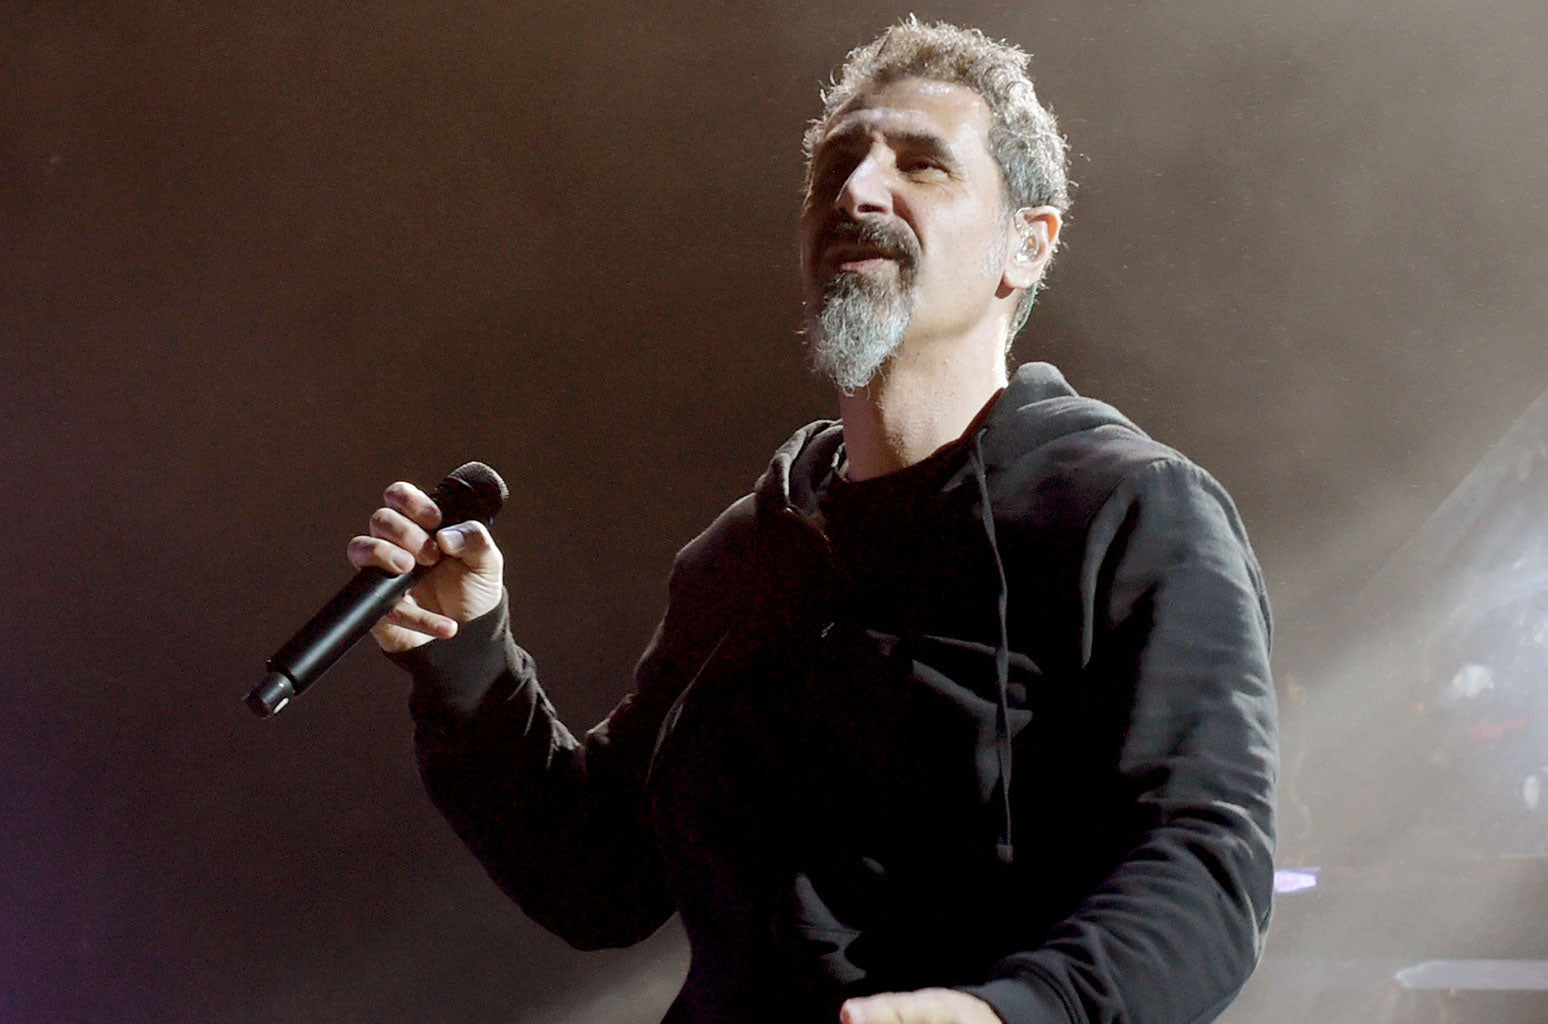 Serj Tankian on Watching ‘I Am Not Alone’ In Light of Armenia’s Current Troubles